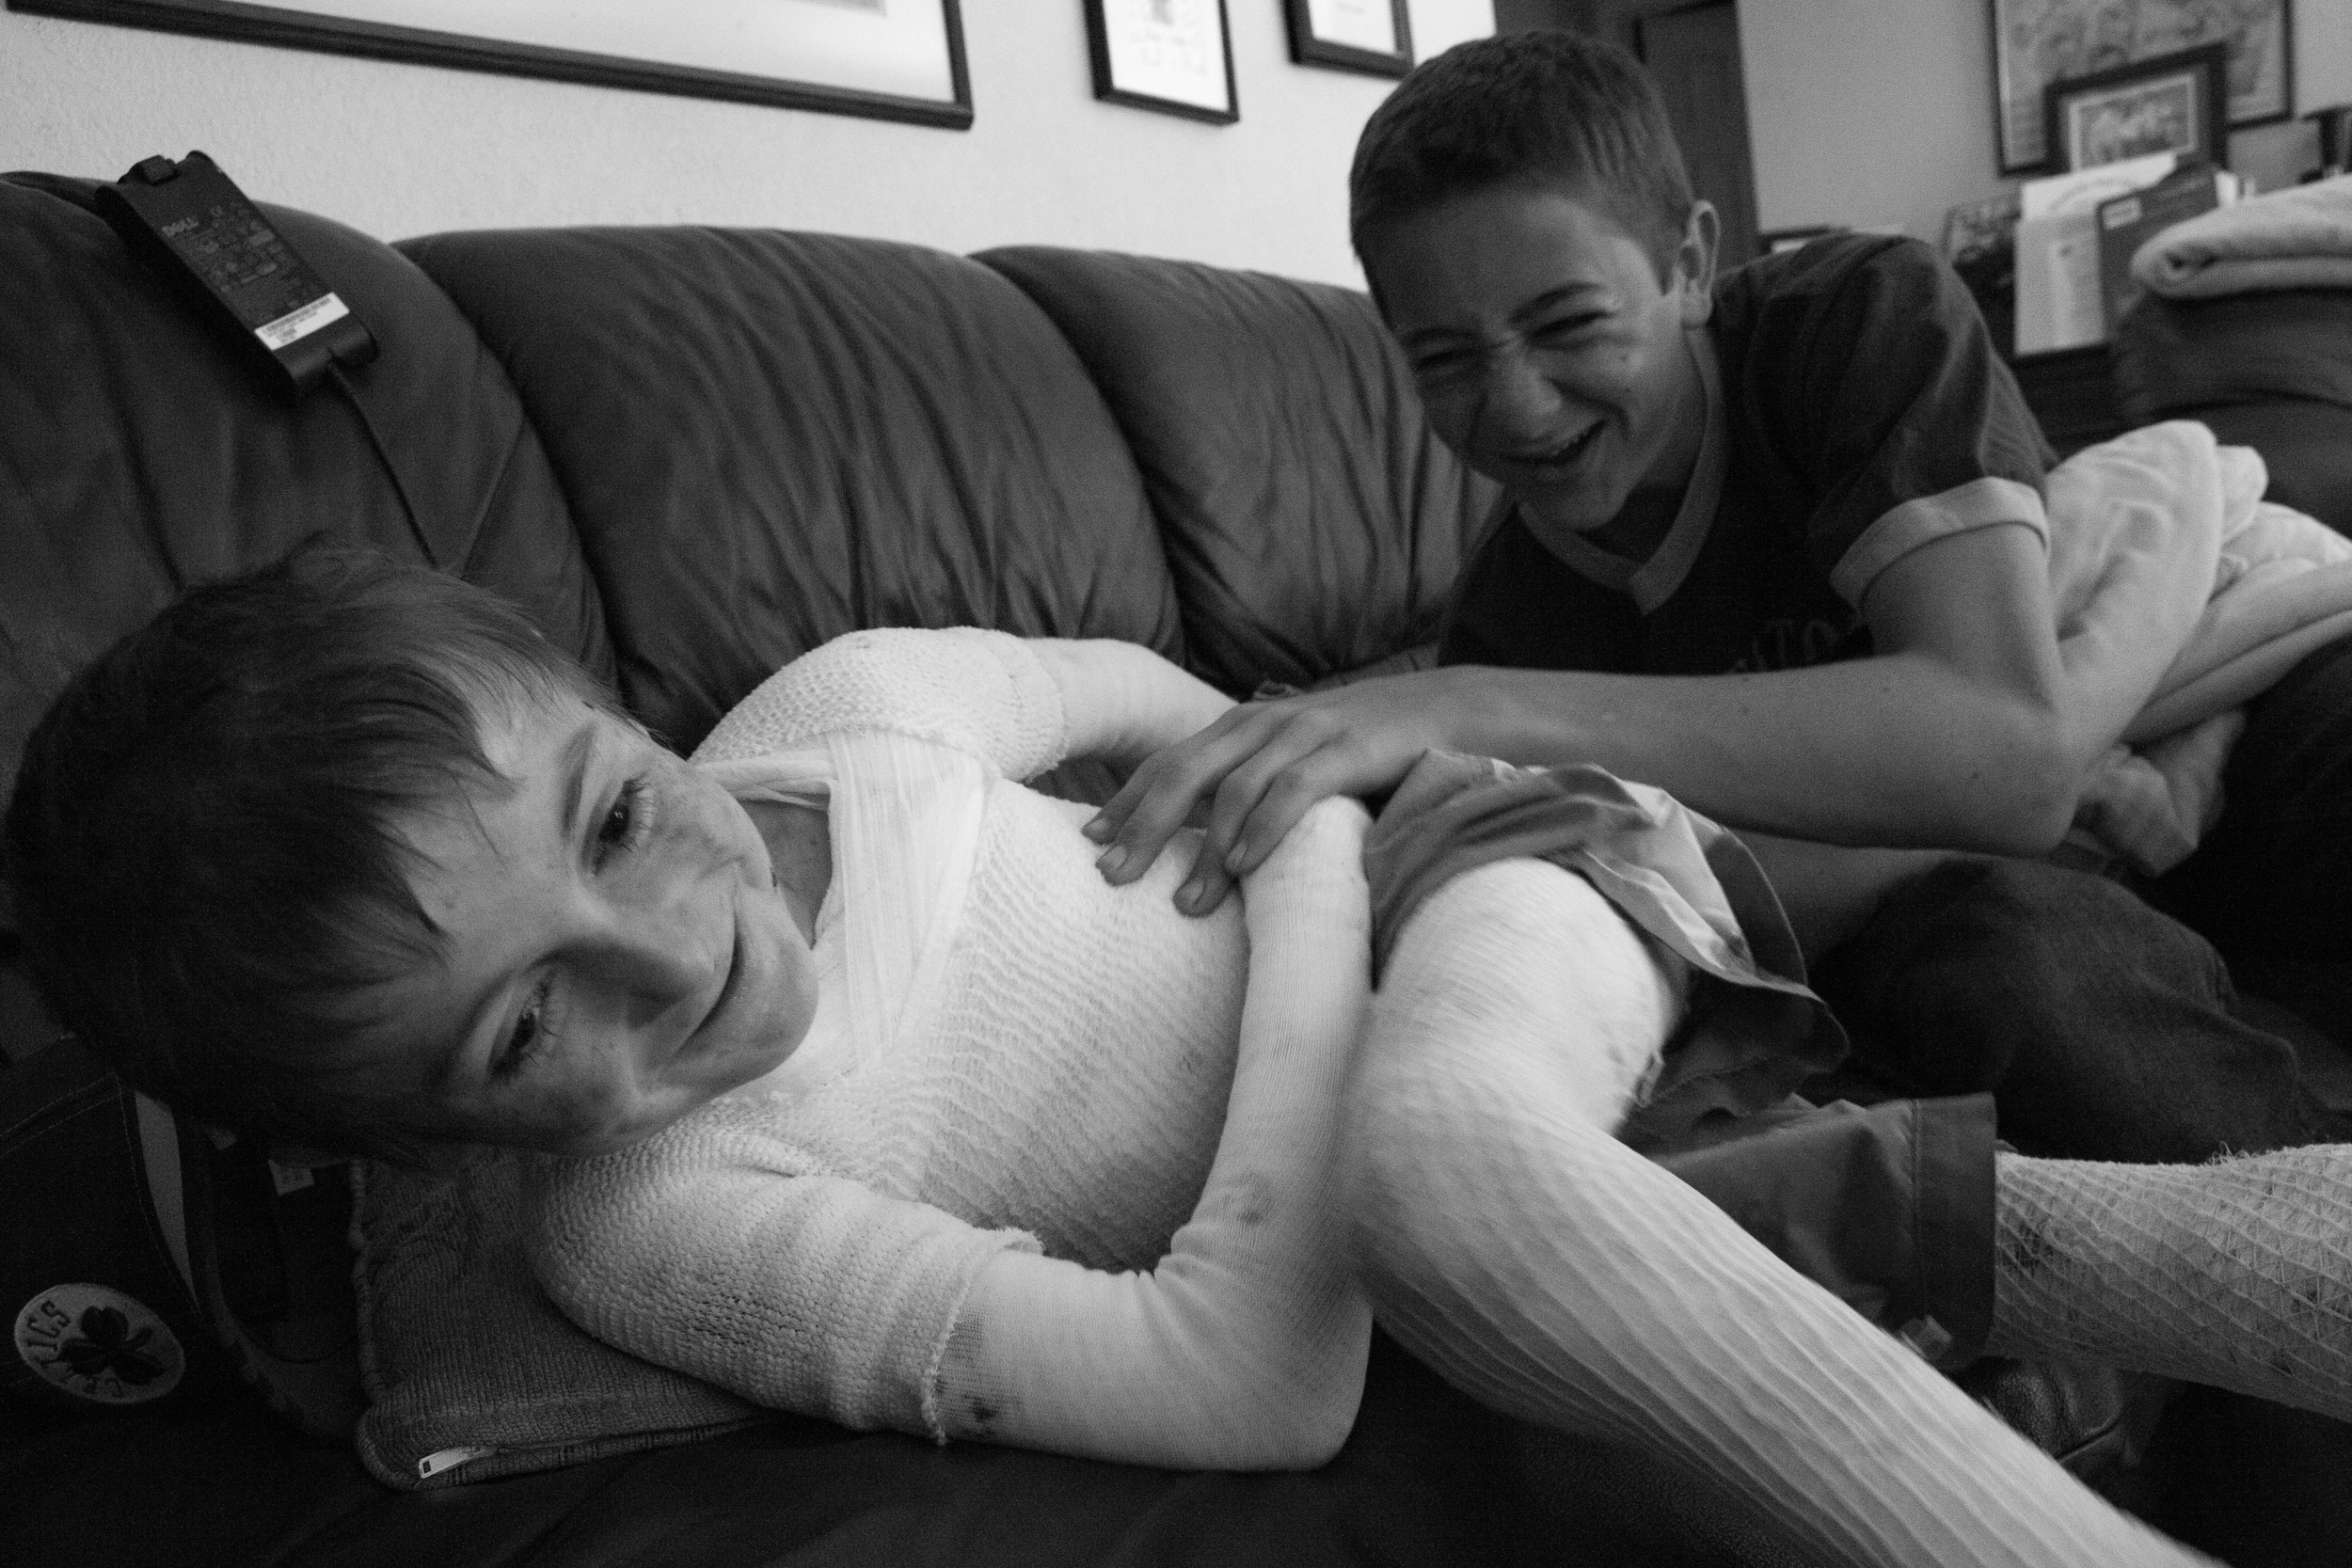  Born with Epidernolysis Bullosa, Garrett Spaulding's skin is very sensitive and is hurt easily. But, leave it to his older brother, David, to find a way to tickle and rough house with his younger brother without hurting him. (Credit Image: Andre J. 